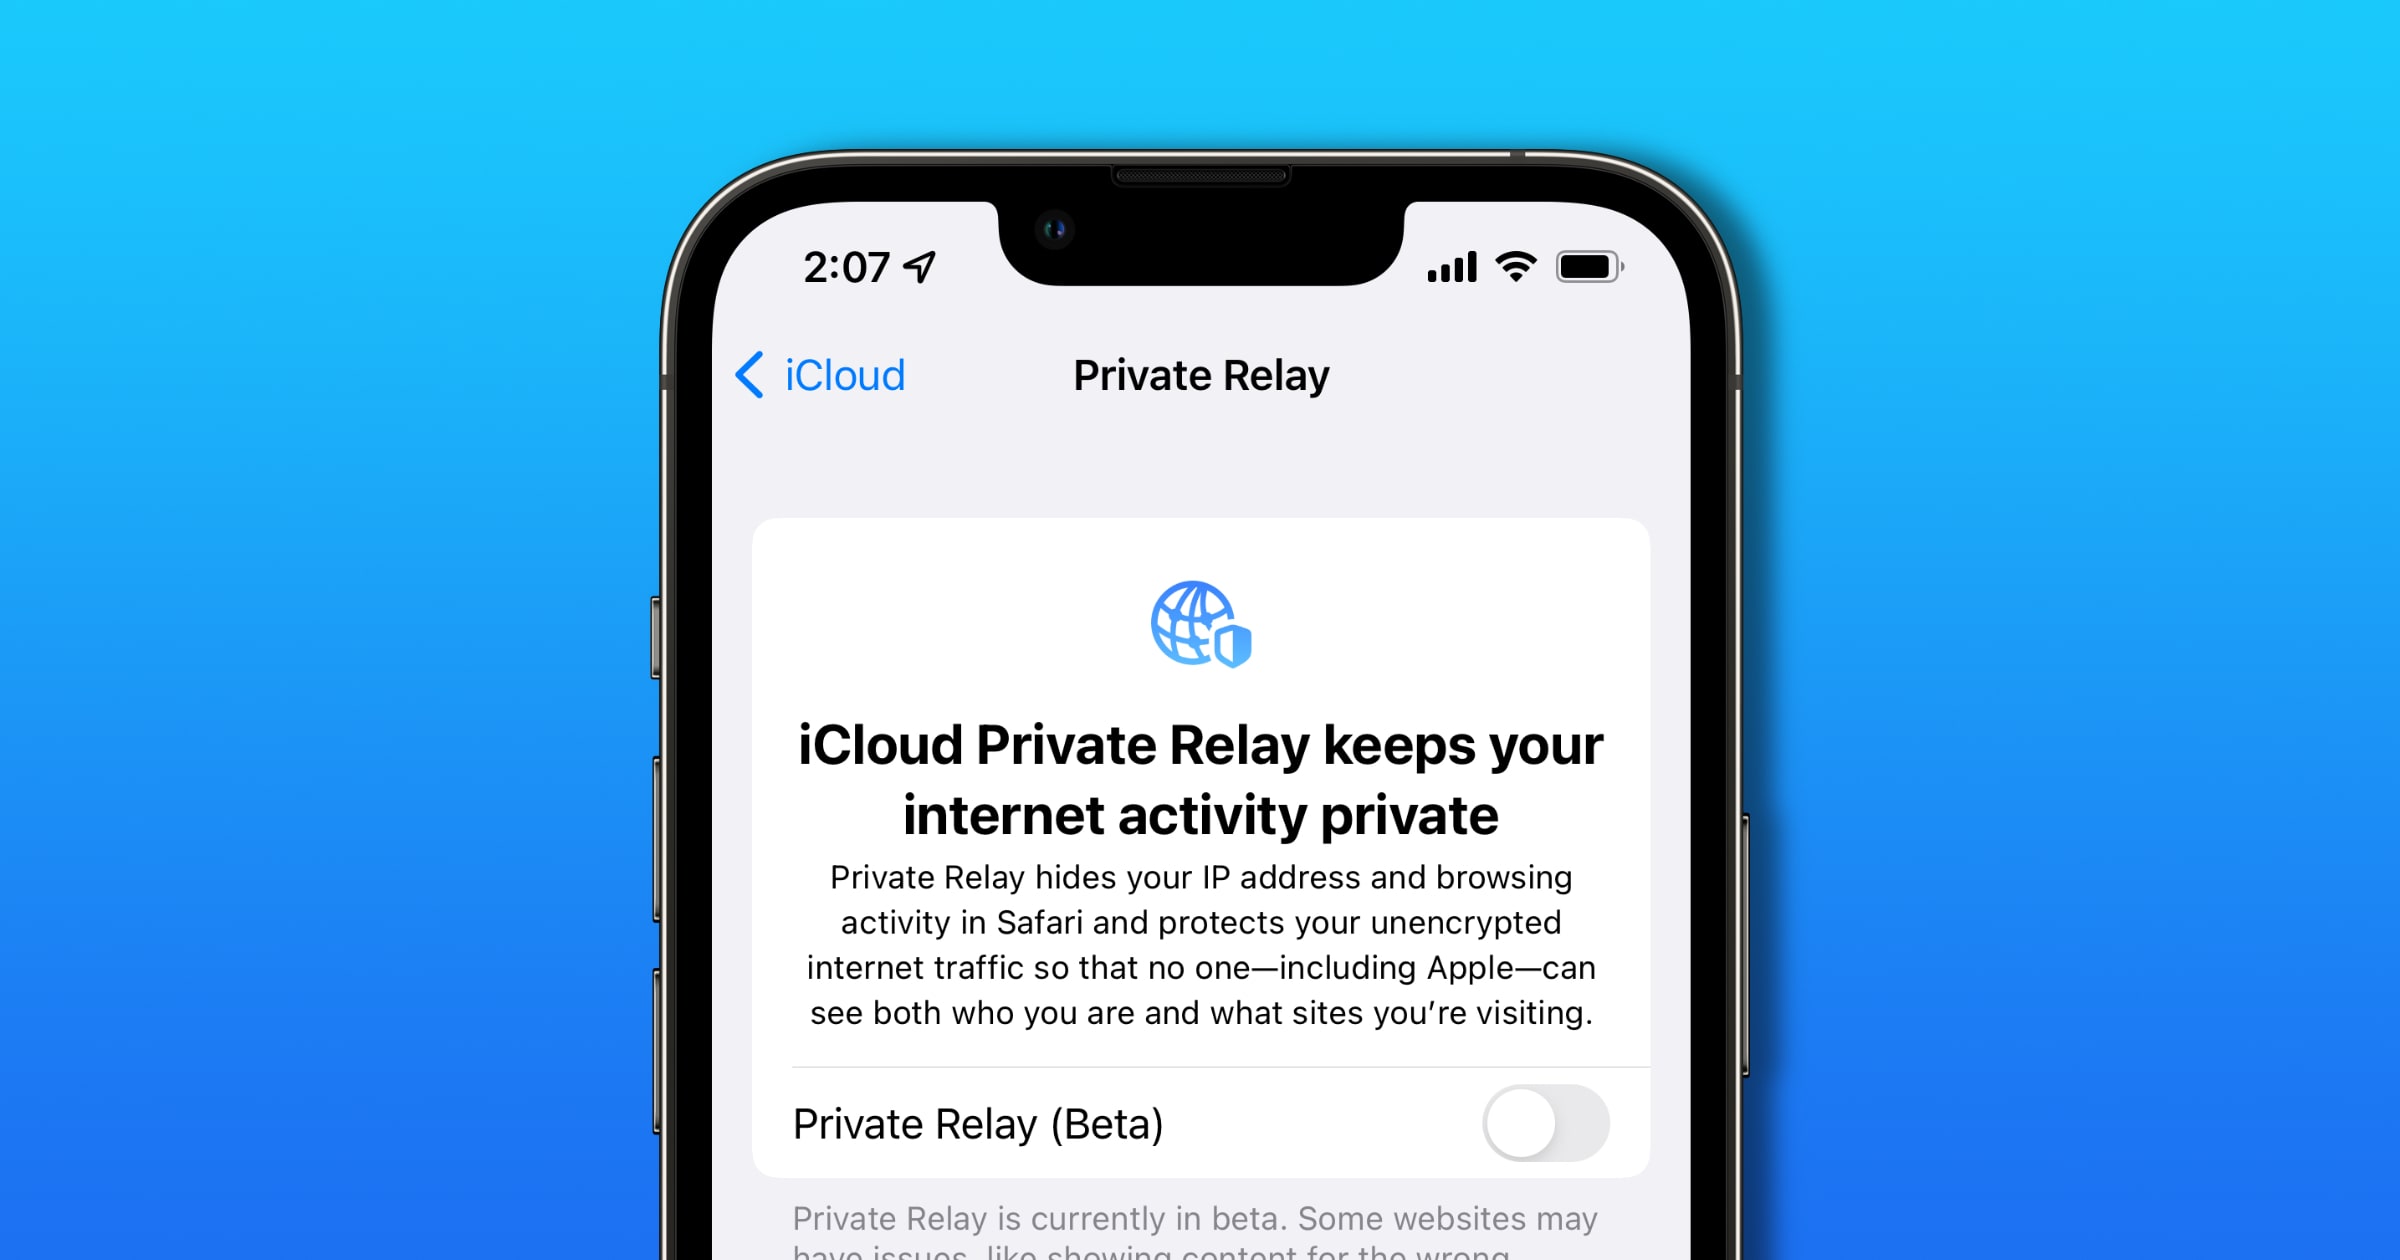 Cloudflare Explains how iCloud Private Relay Works